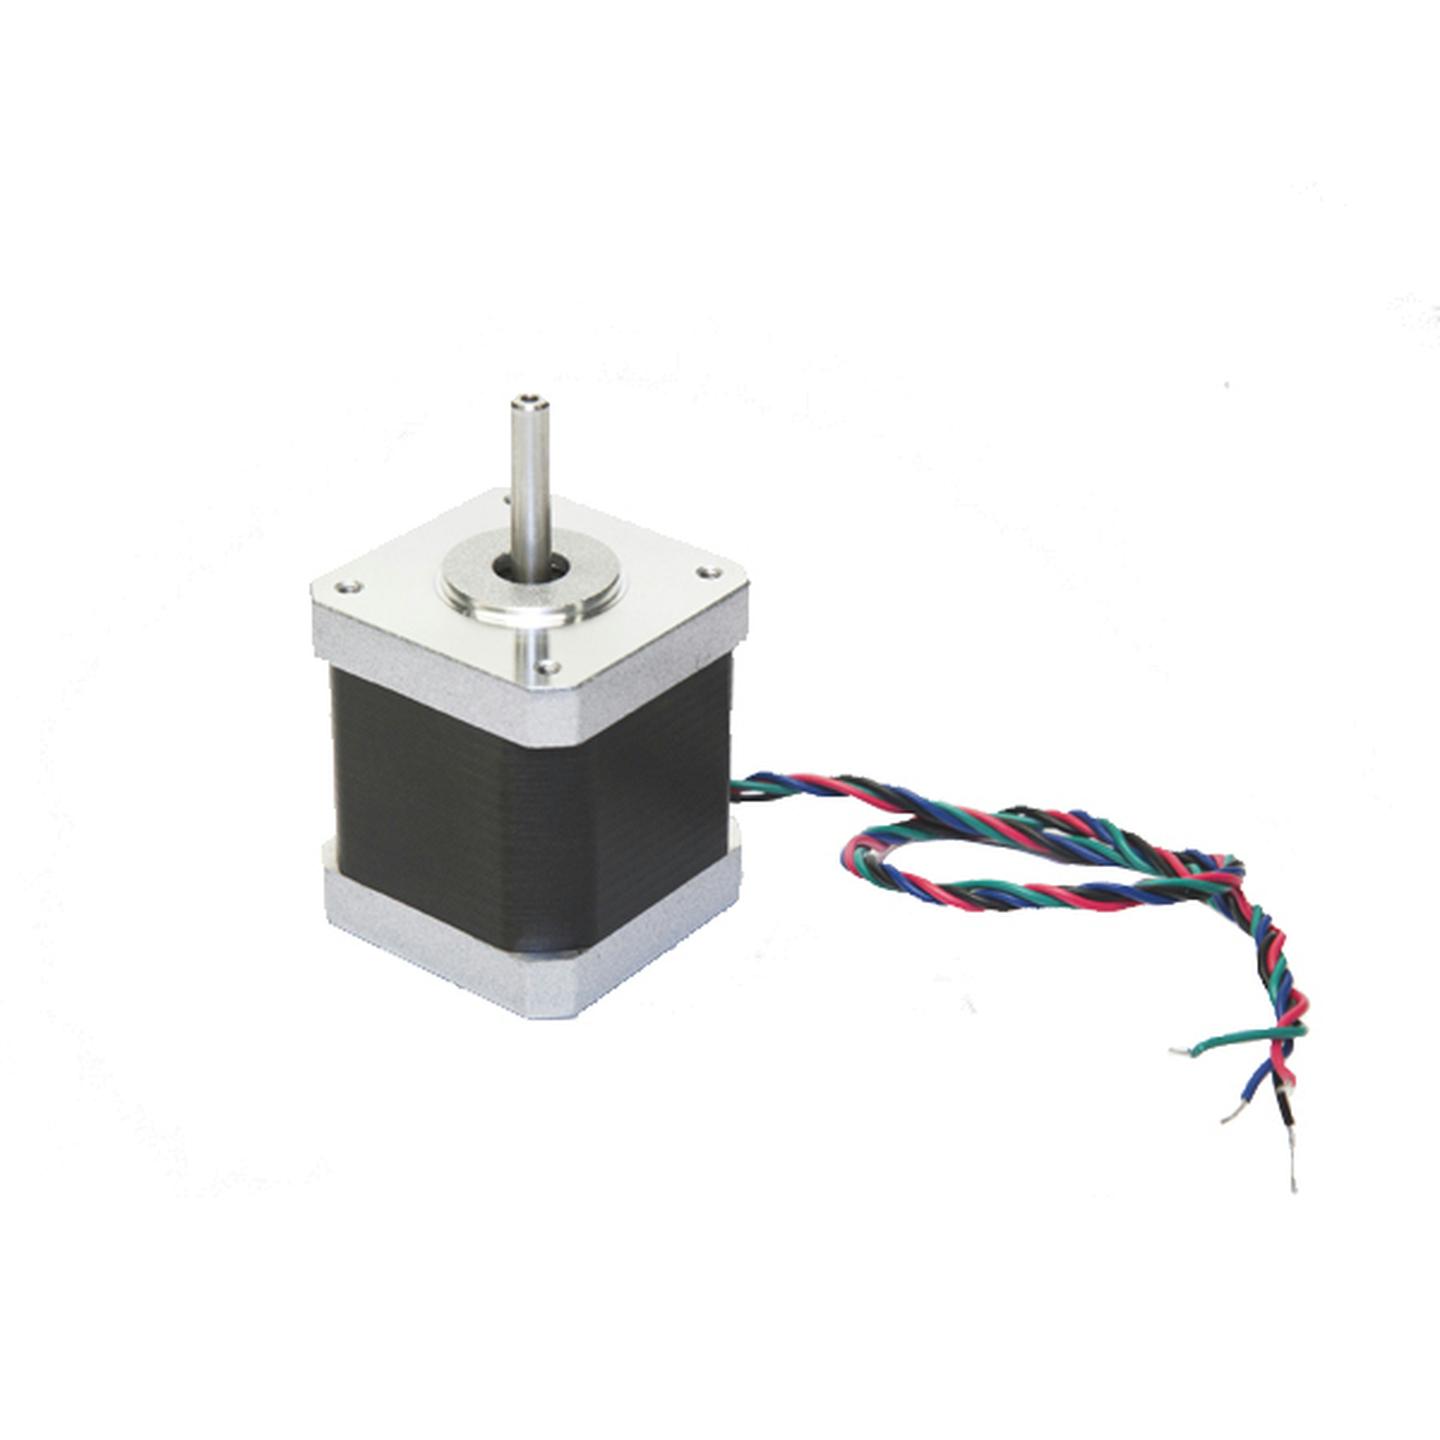 Stepper Motor 2.5 A Step 1.8 for TL4020 